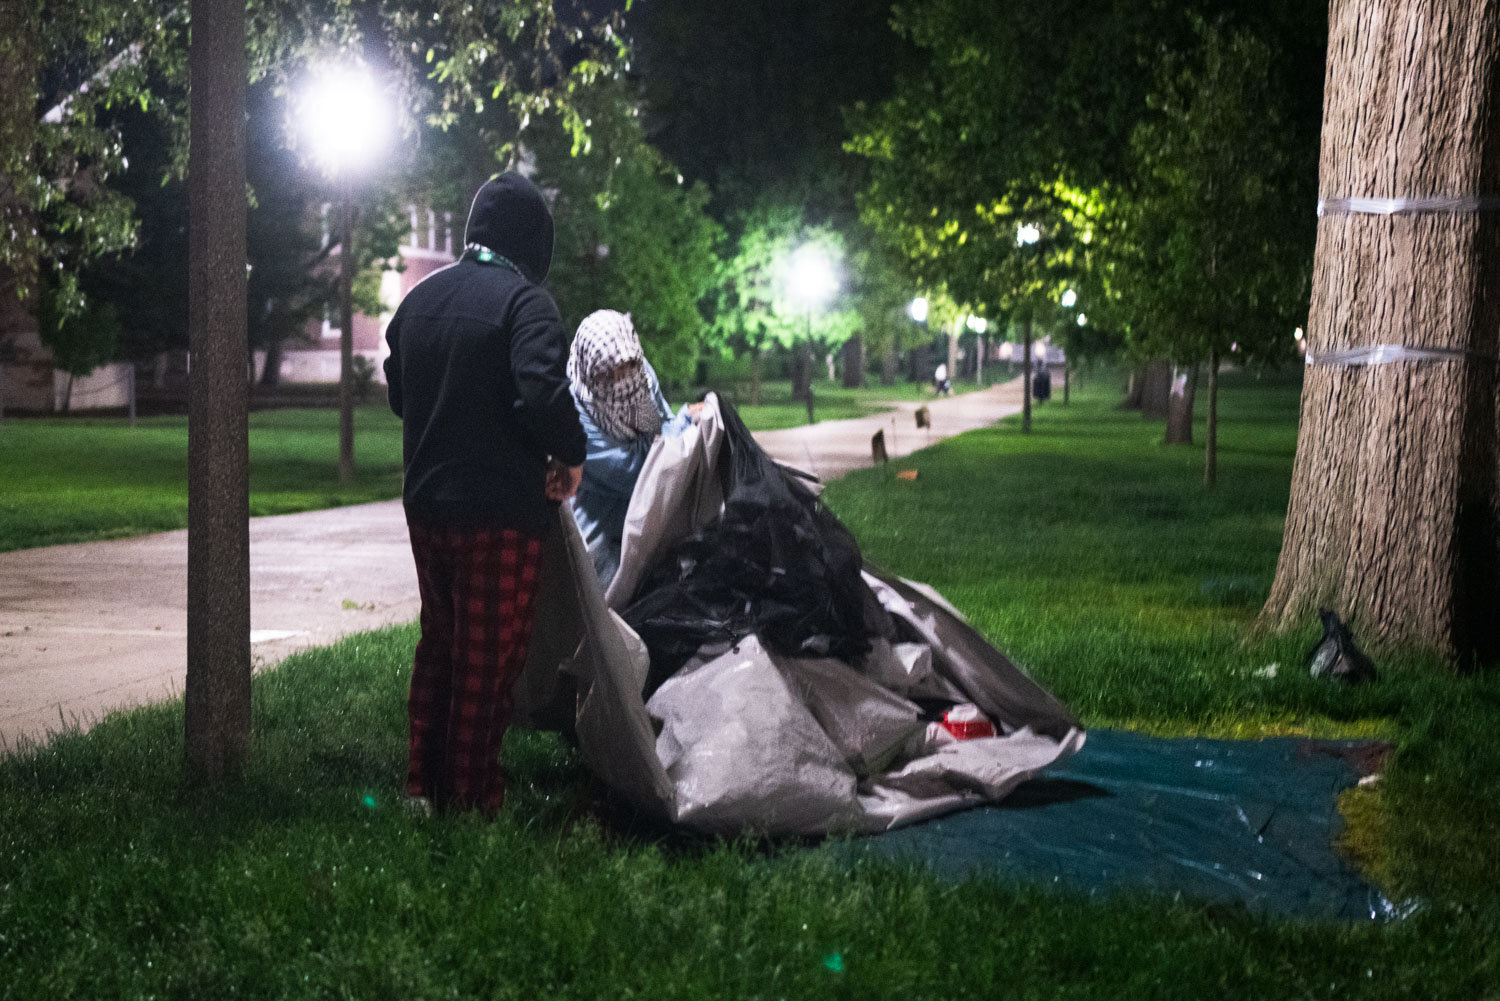 Protesters dismantle and tidy the encampment, including the medical tent, on Friday.